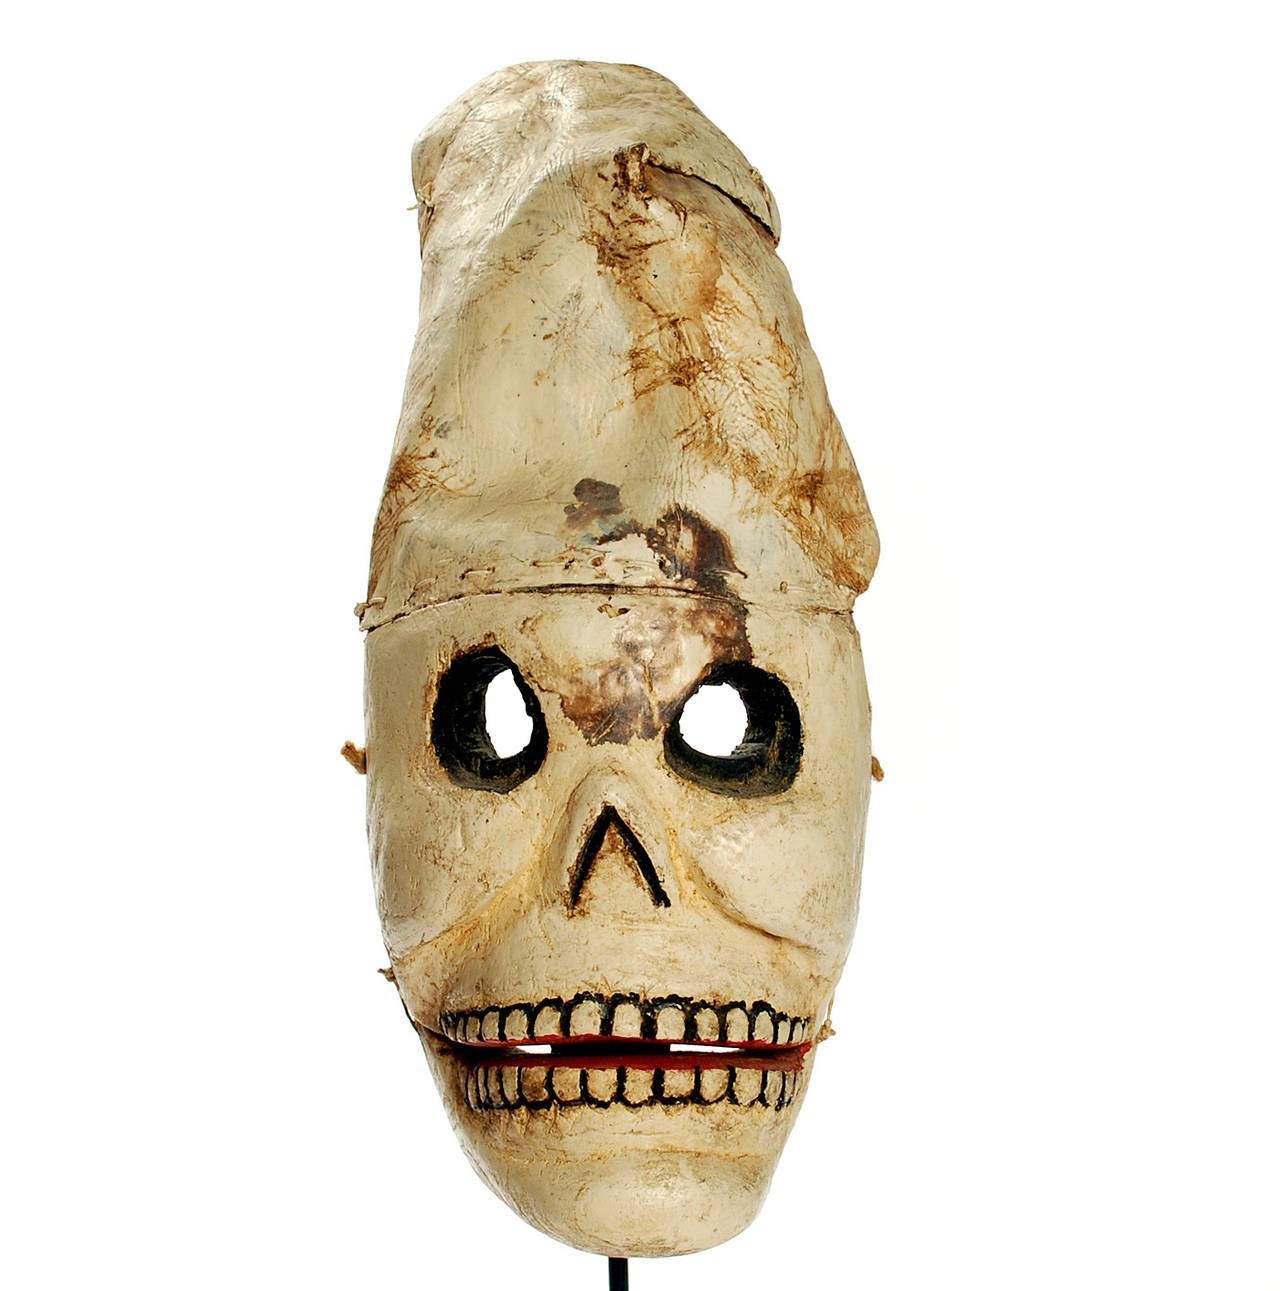 A superb early 20th century Mexican 'muerte' mask (death mask) from Guerrero, circa 1920s-1930s. Hand-carved and polychrome painted wood together with hand-stitched and molded leather soccer ball helmet. The jaw is articulated, with a knotted hinge